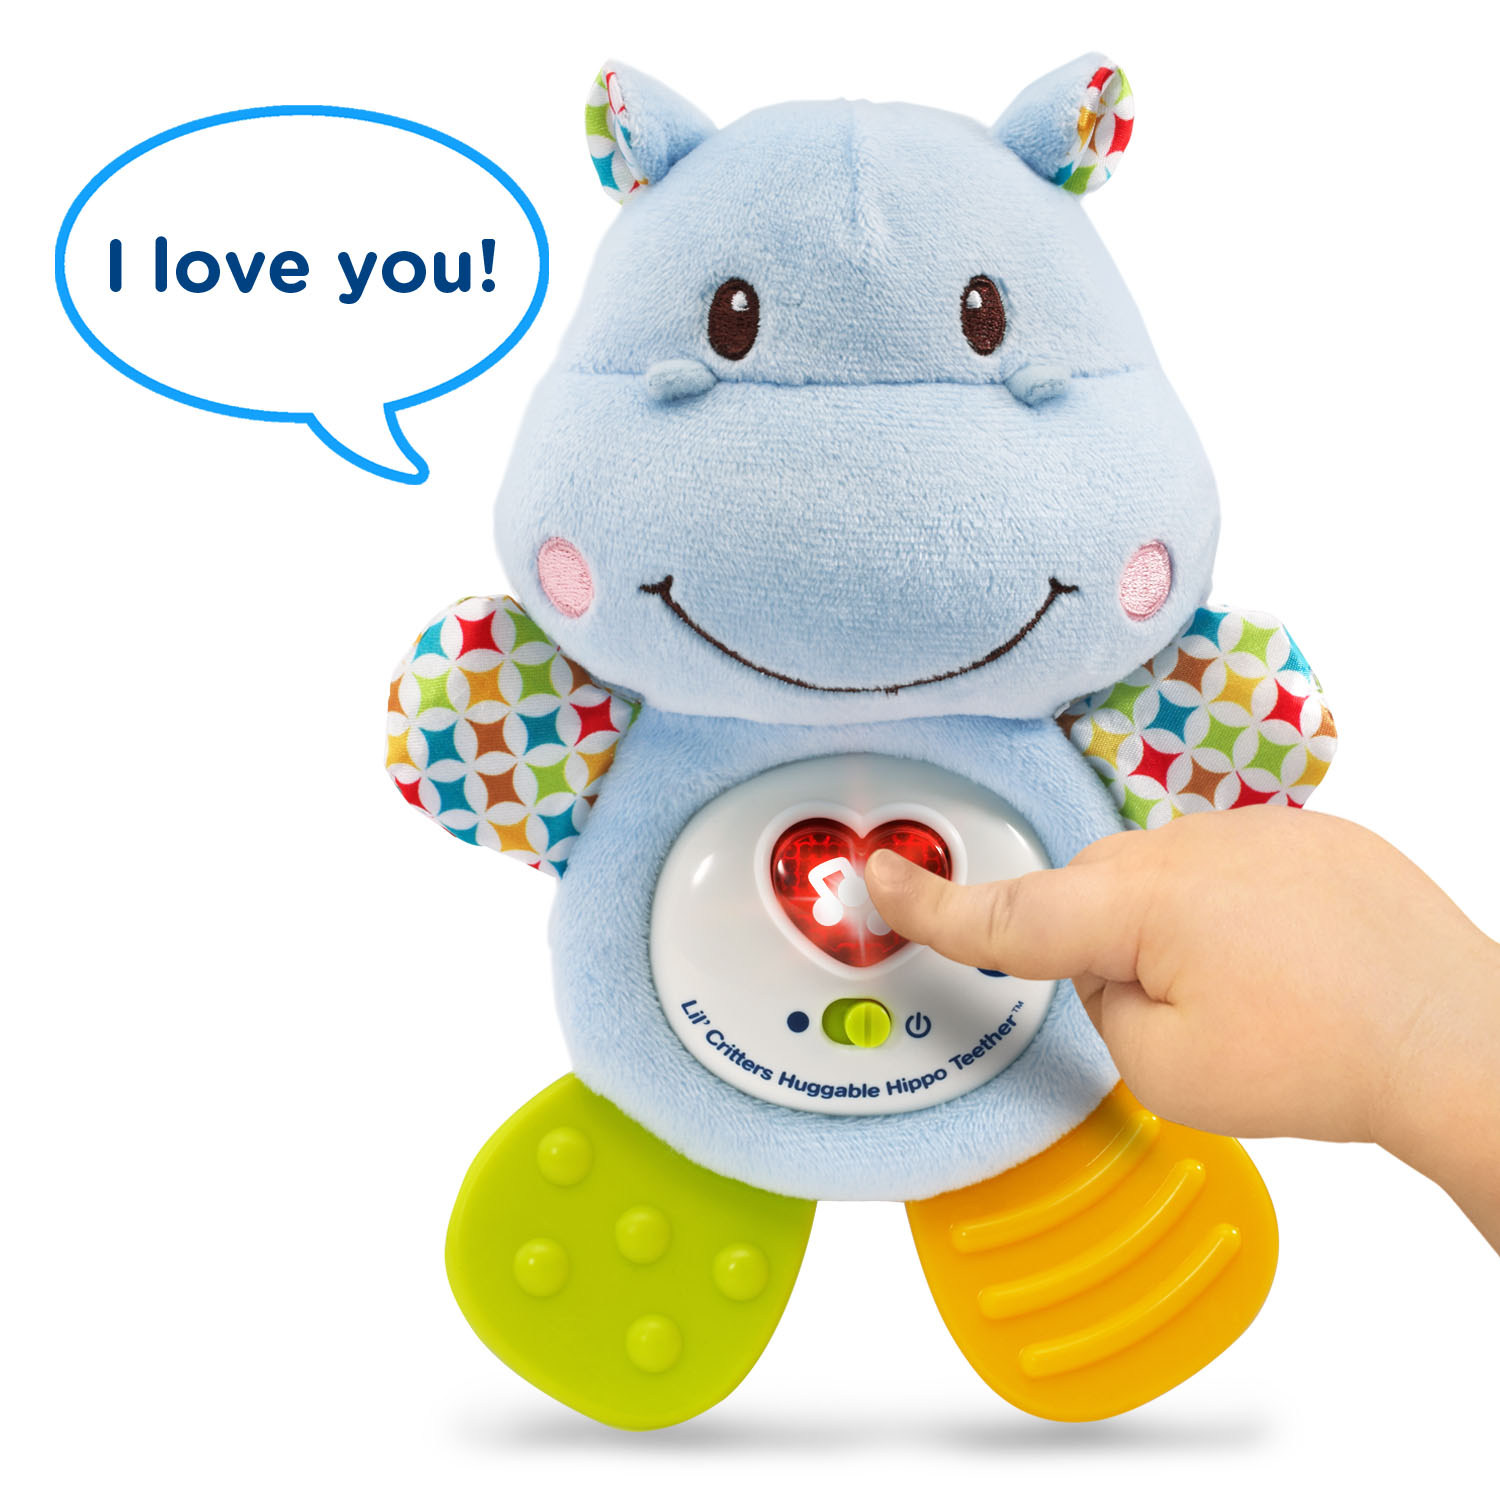 VTech Lil' Critters Huggable Hippo Teether - image 4 of 6